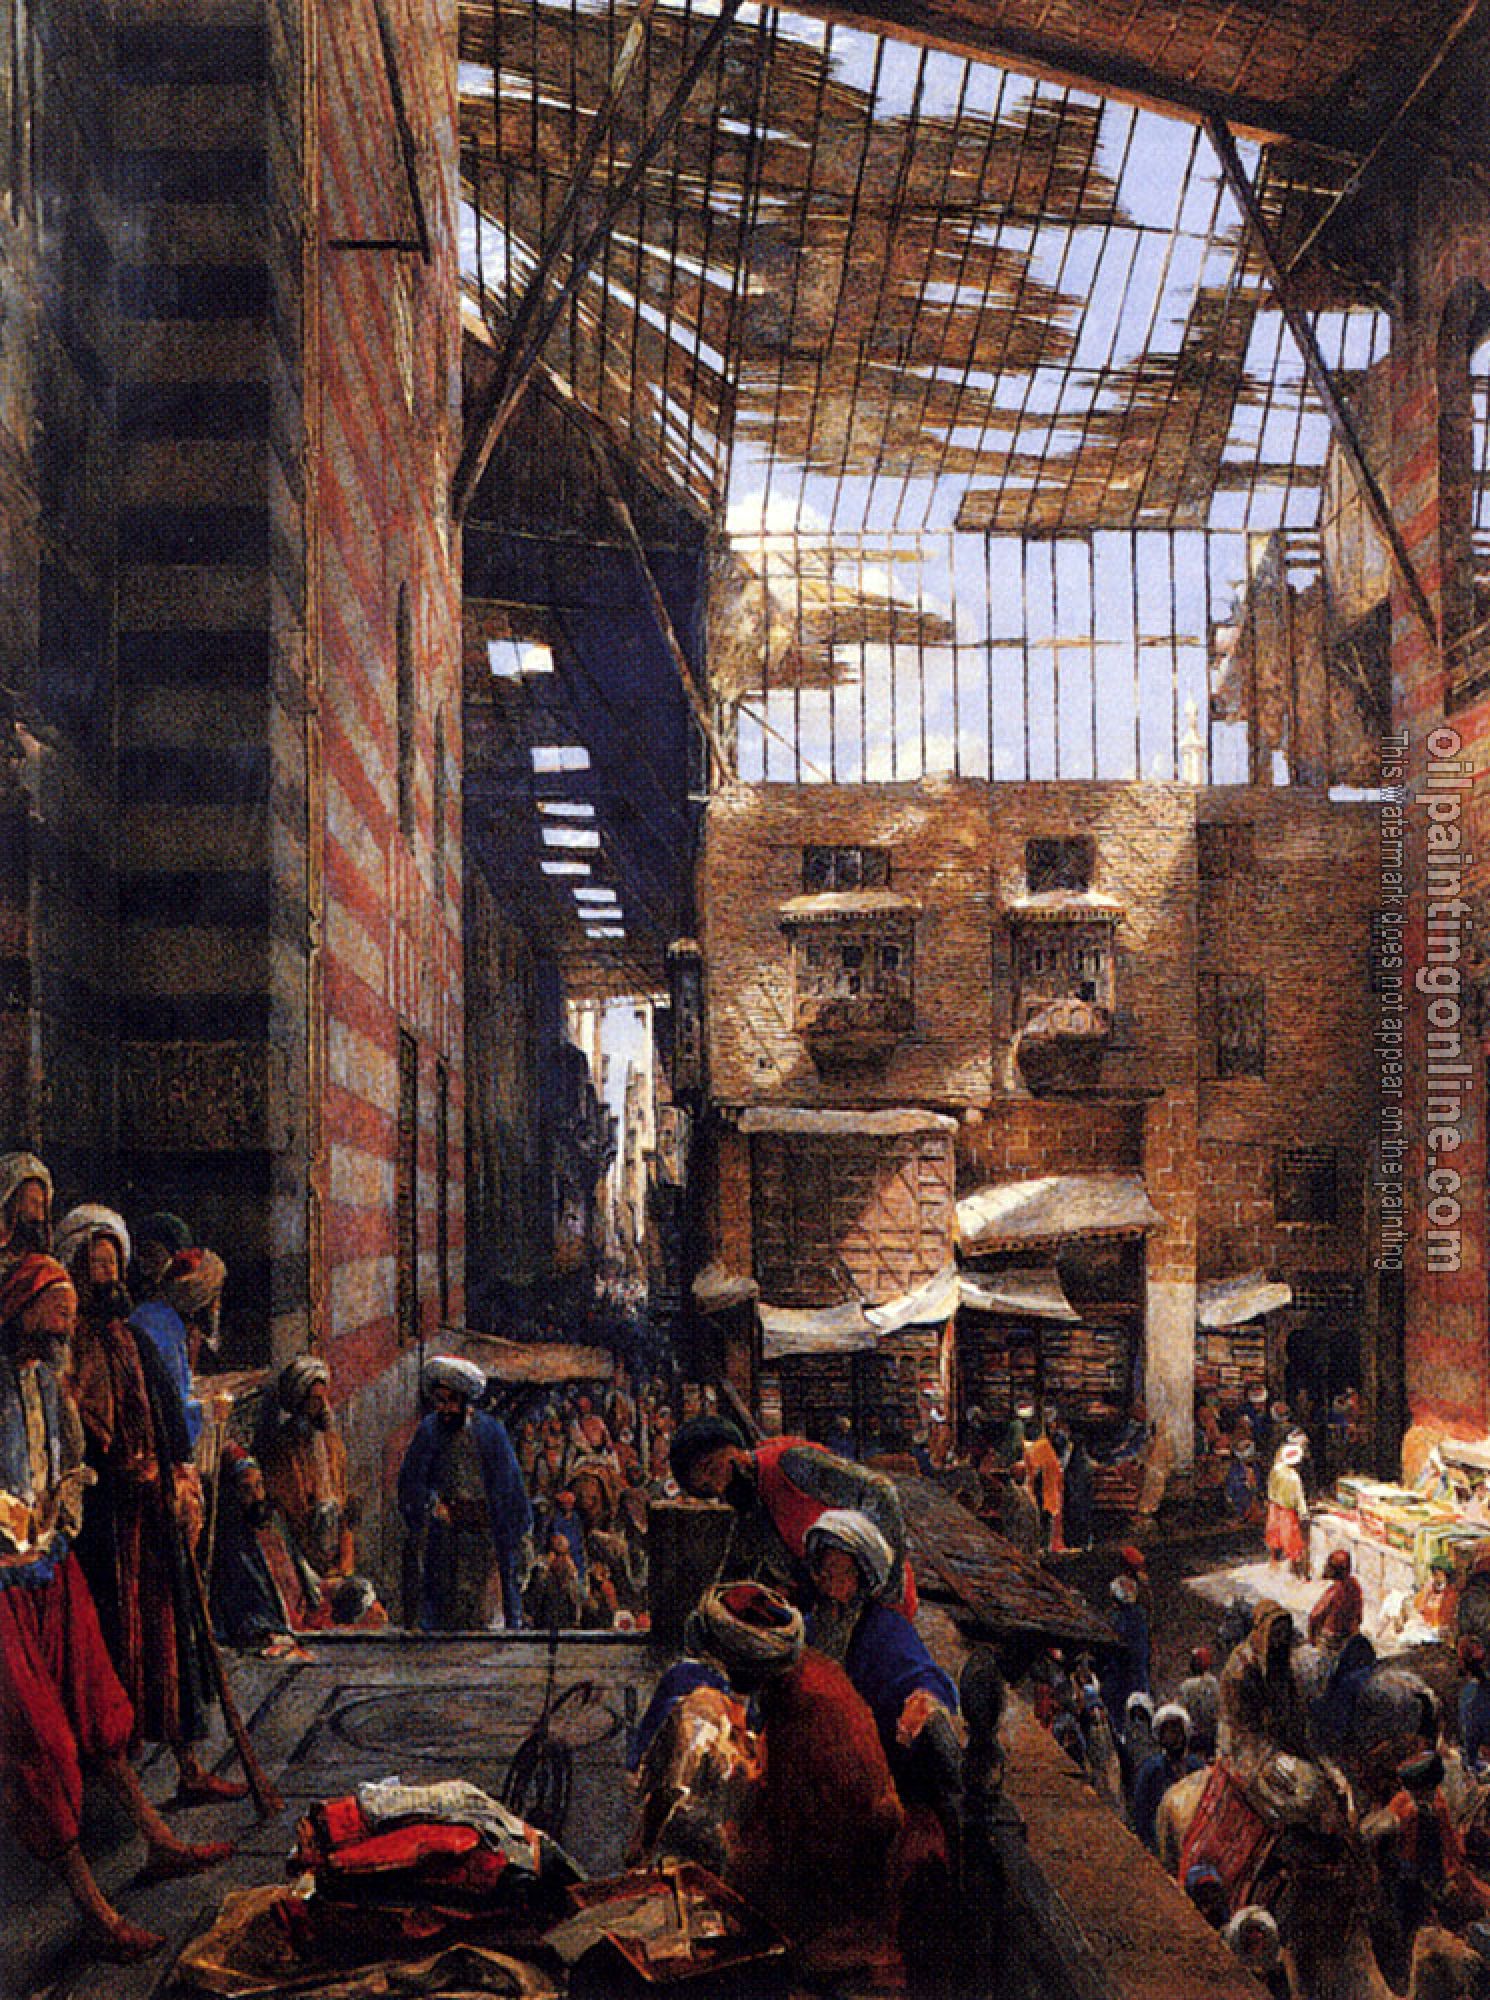 Lewis, John Frederick - A View Of The Street And Morque Of Ghorreyah, Cairo